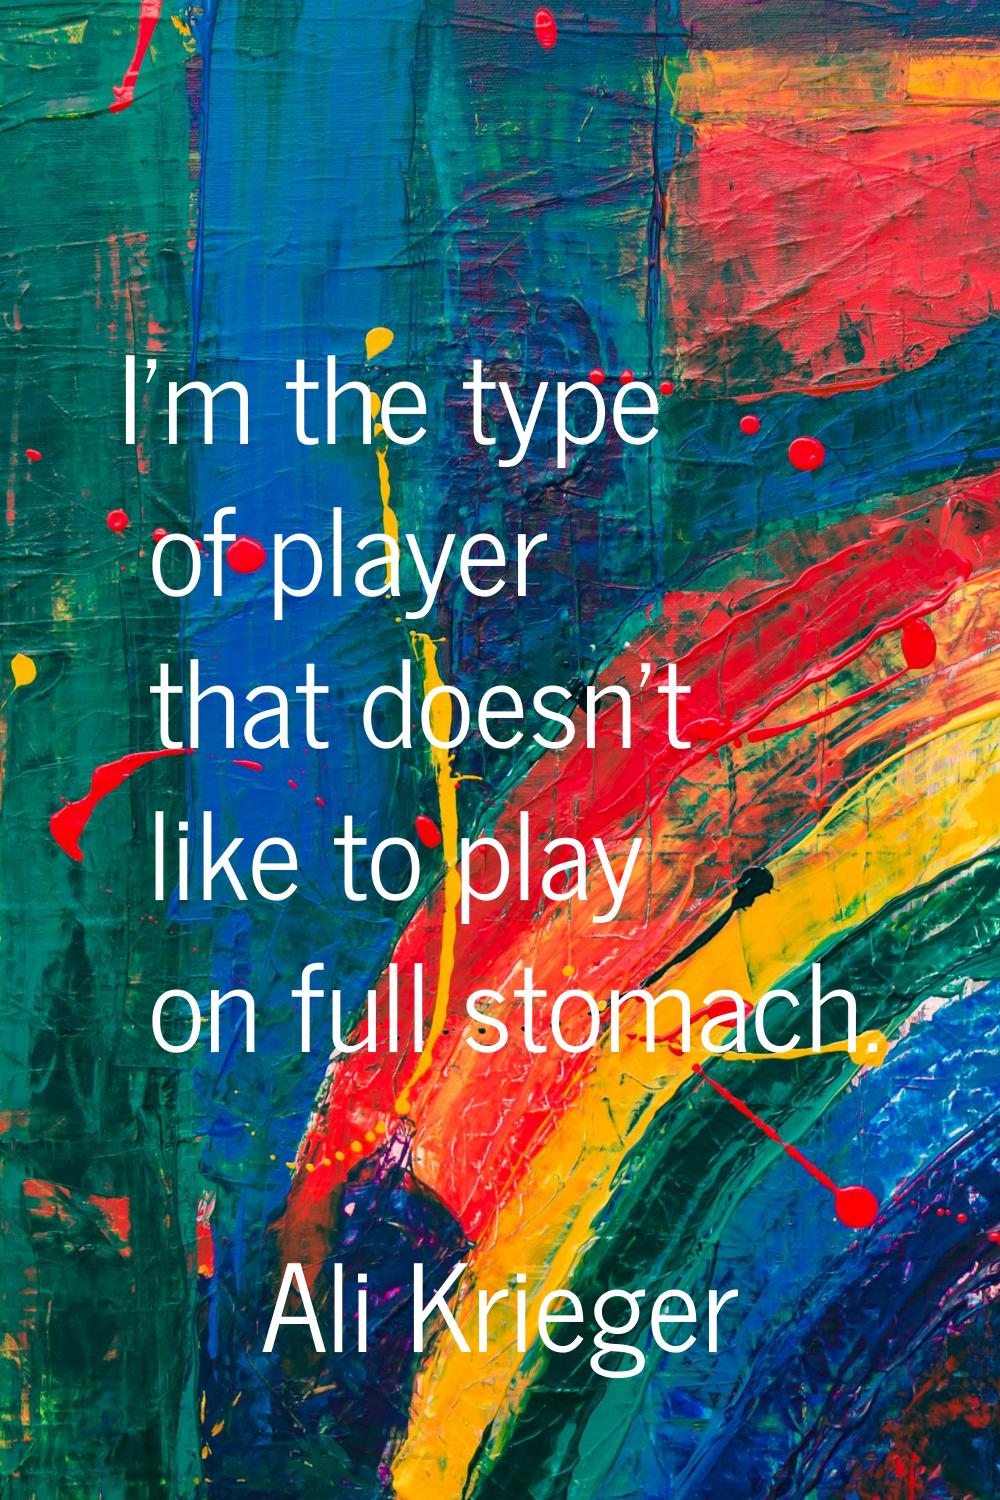 I'm the type of player that doesn't like to play on full stomach.